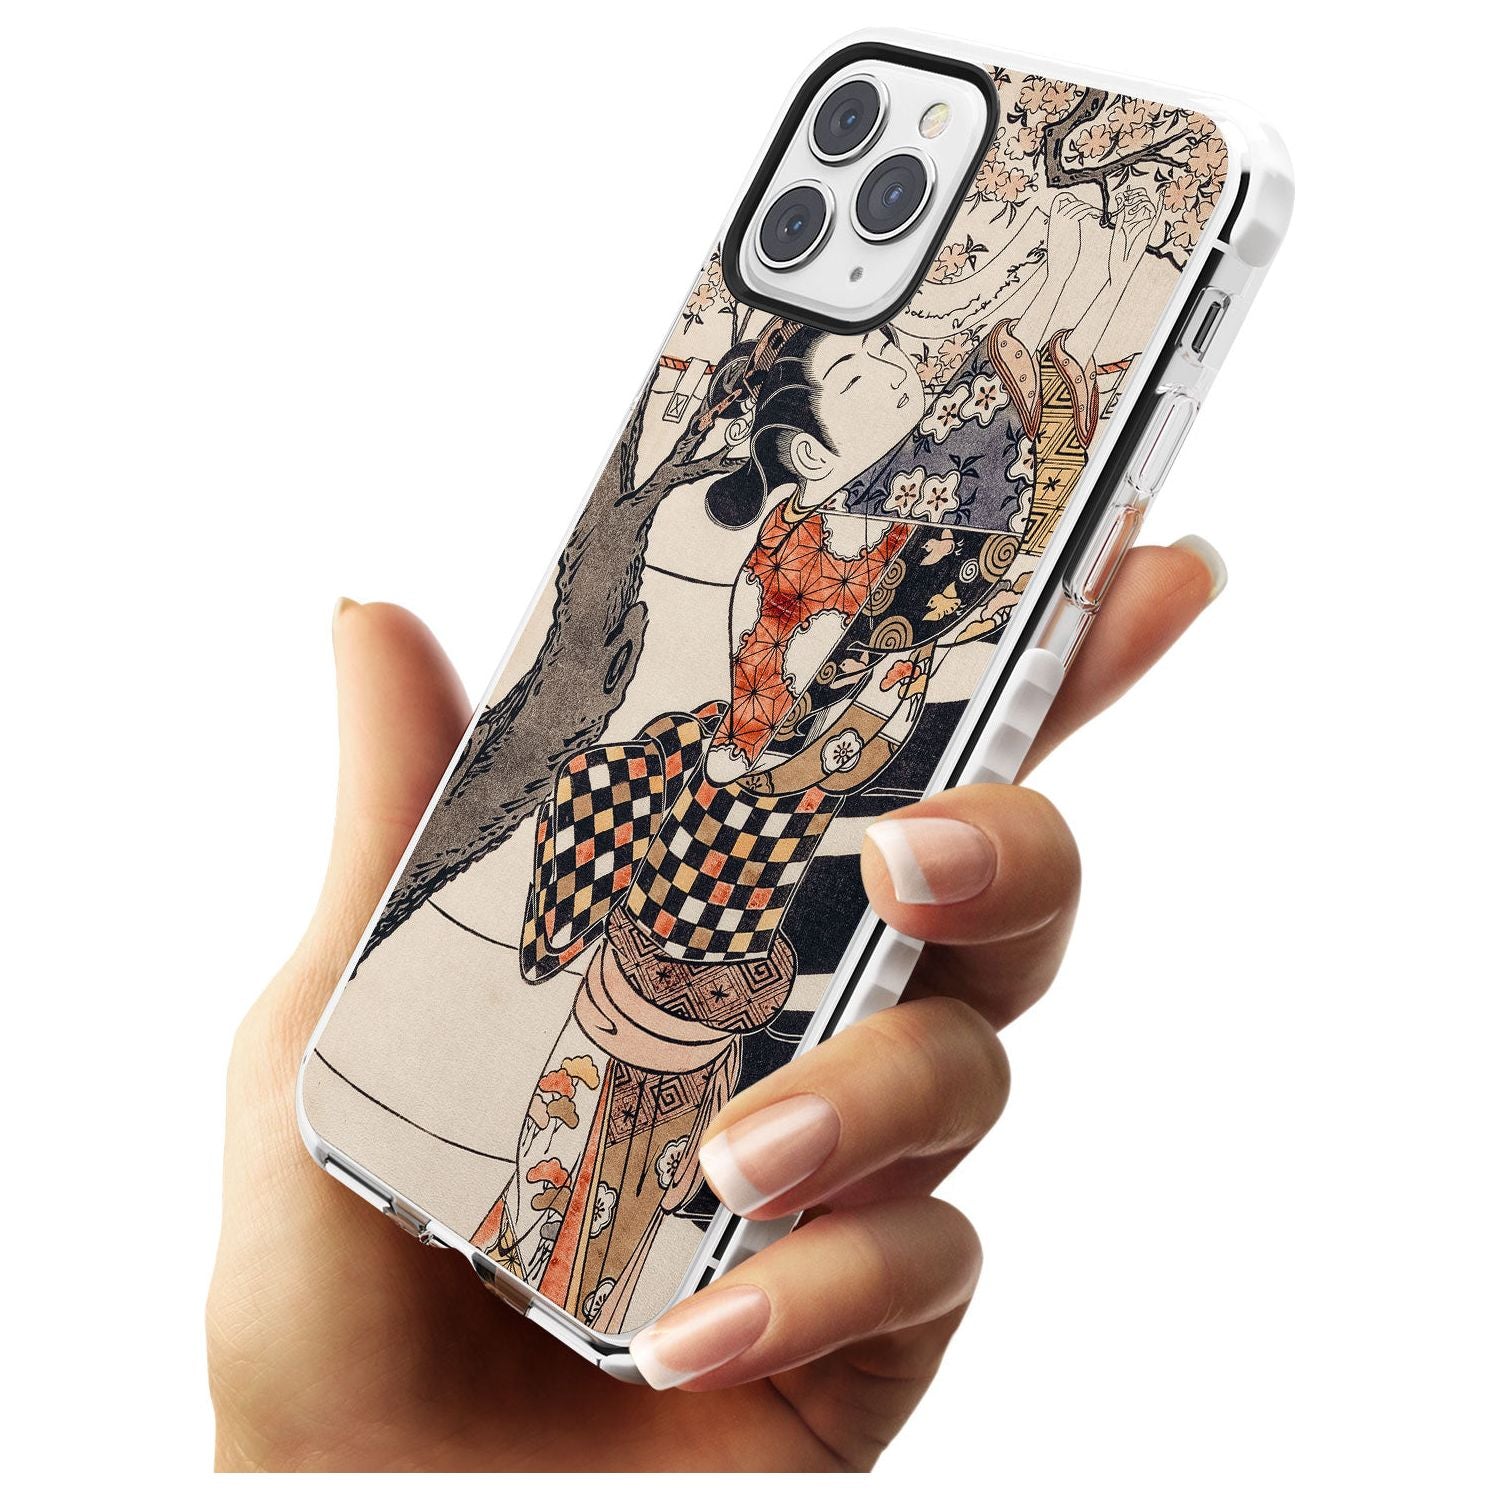 Vintage Japan Impact Phone Case for iPhone 11 Pro Max